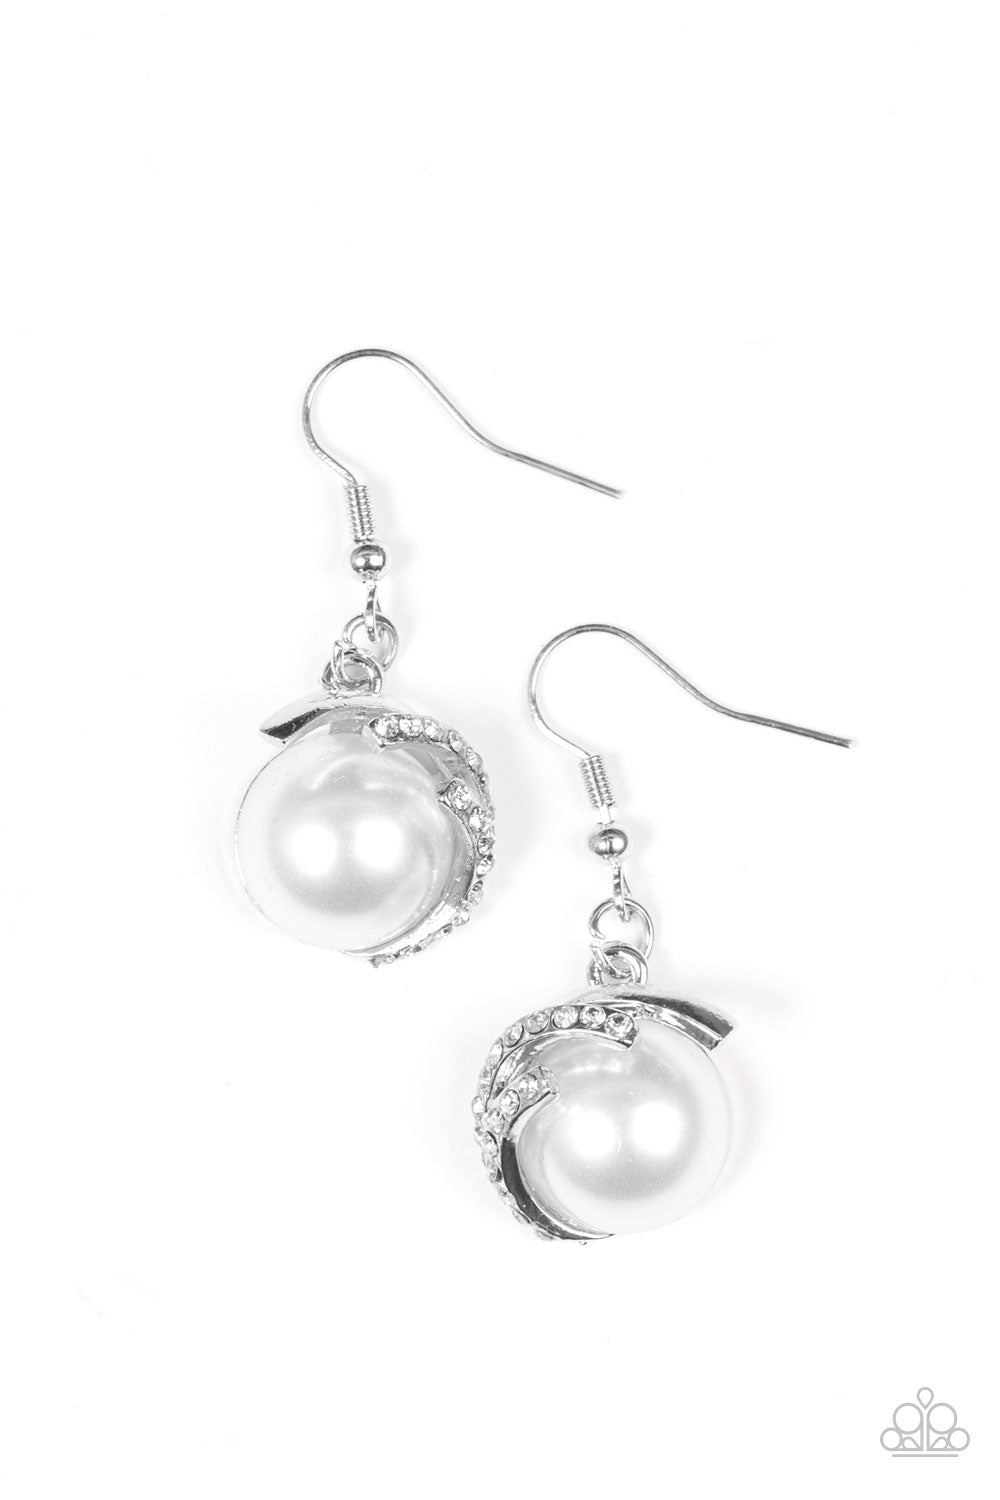 WHAT YOU SEA IS WHAT YOU GET - WHITE PEARL CRESCENT MOON EARRINGS